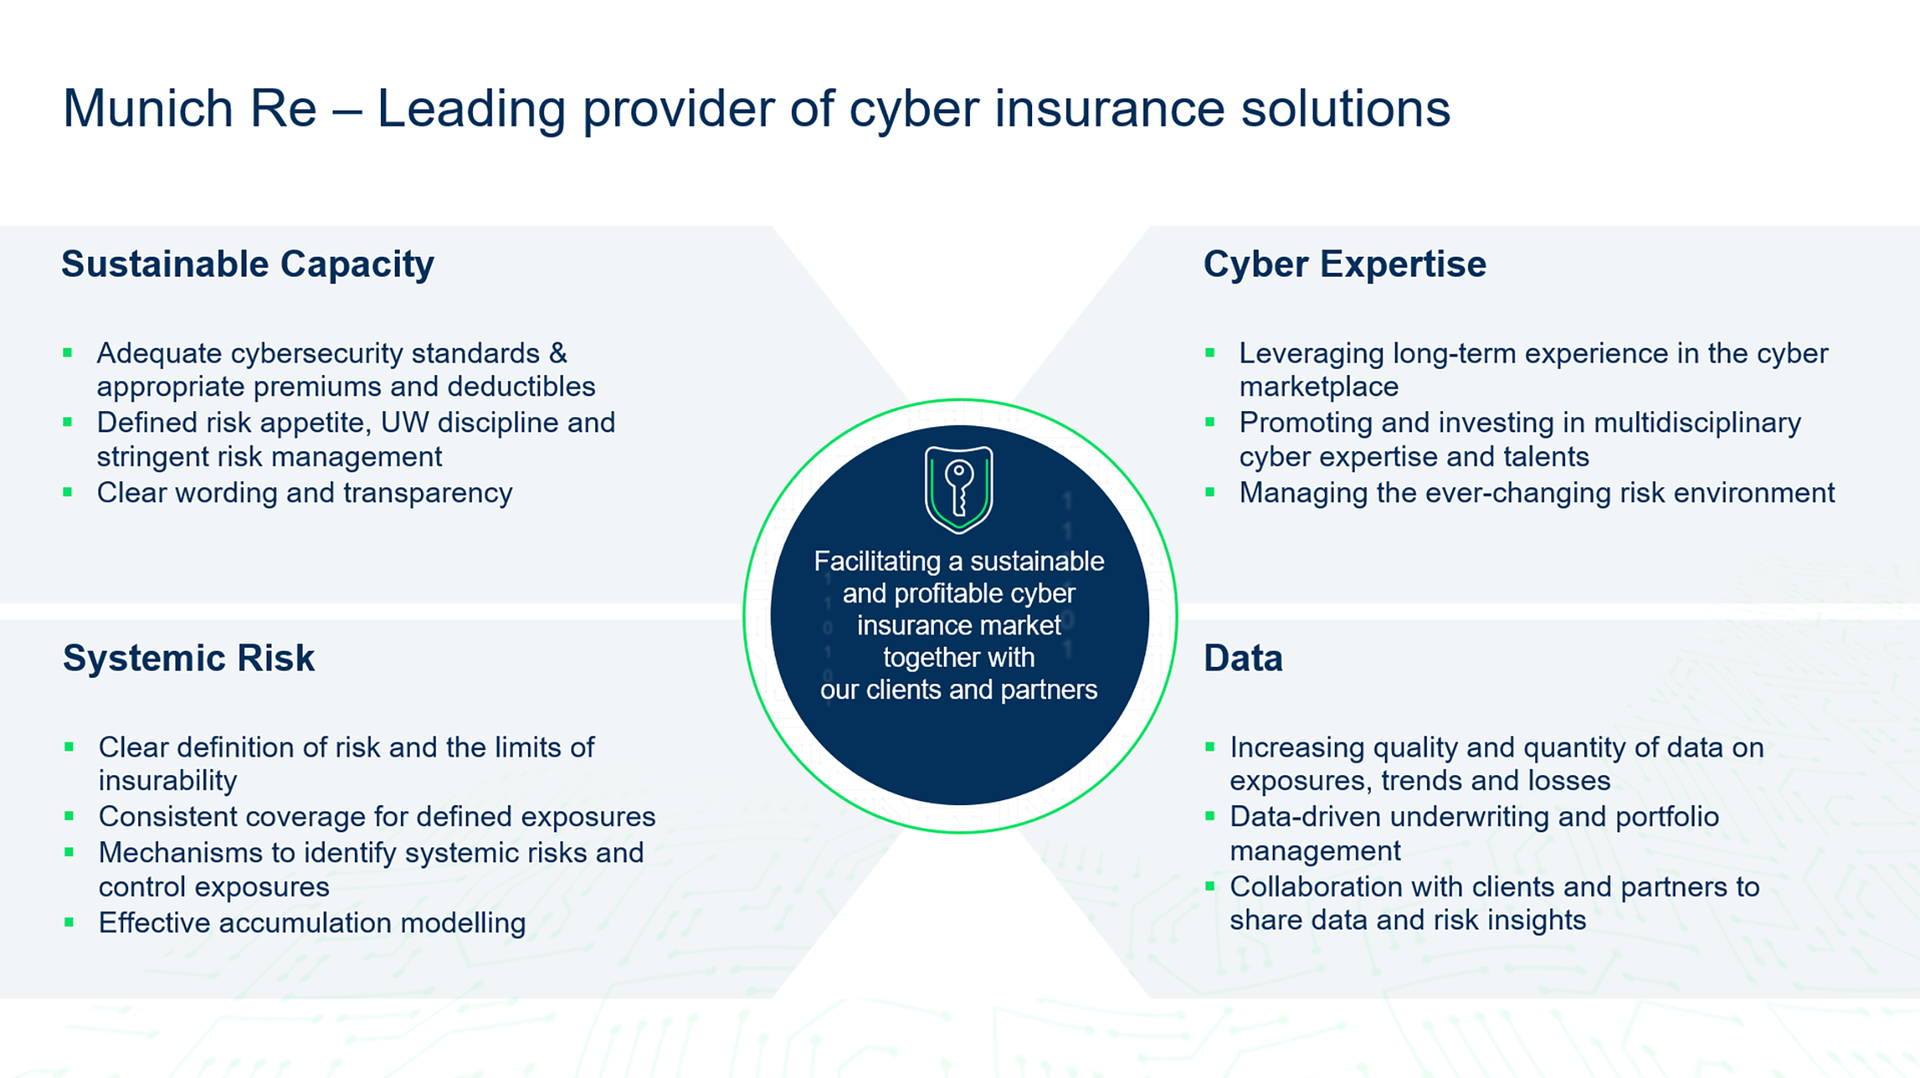 Munich Re - leading provider of cyber insurance solutions